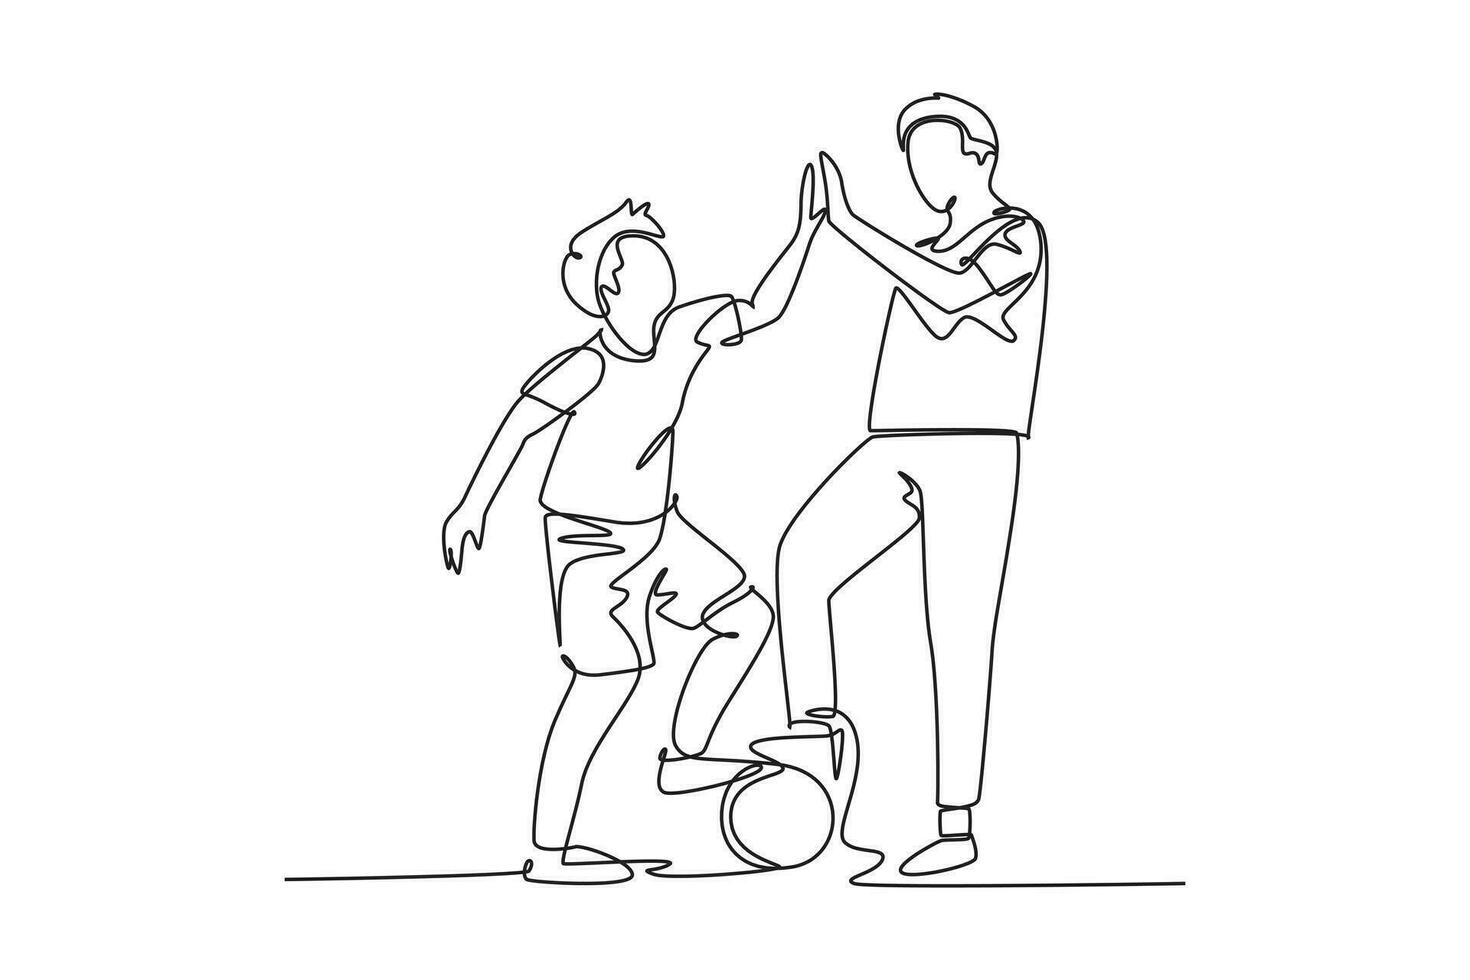 Continuous one line drawing active father and son playing football together on outdoor field and giving high five gesture. Happy parenting concept. Single line draw design vector graphic illustration